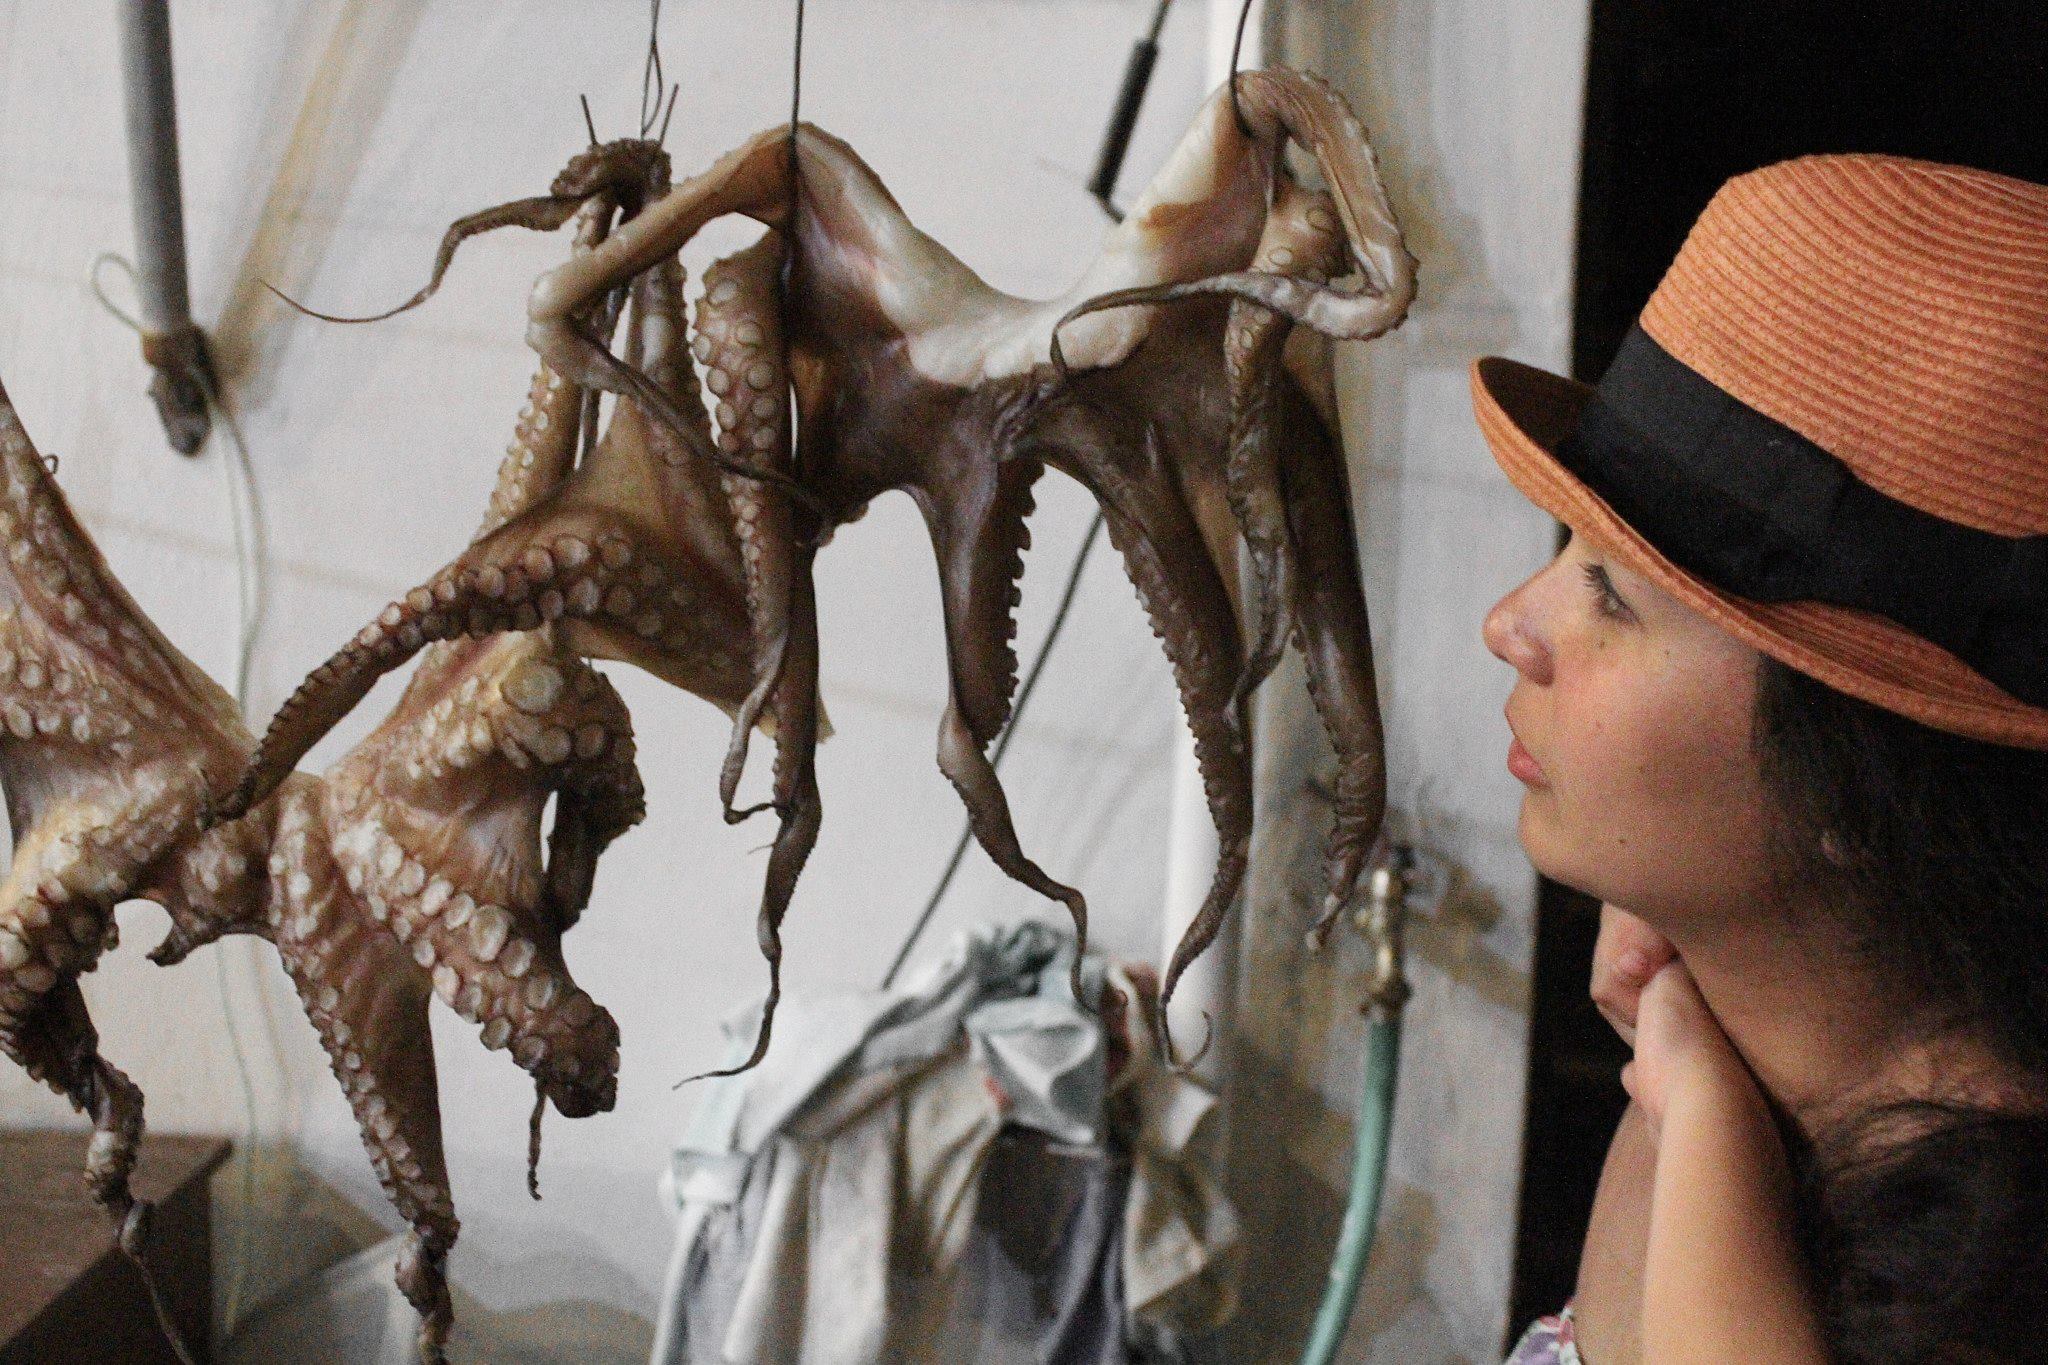 Dariejane fascinated by the sight of two octopuses being hung to dry in Monemvasia, Greece